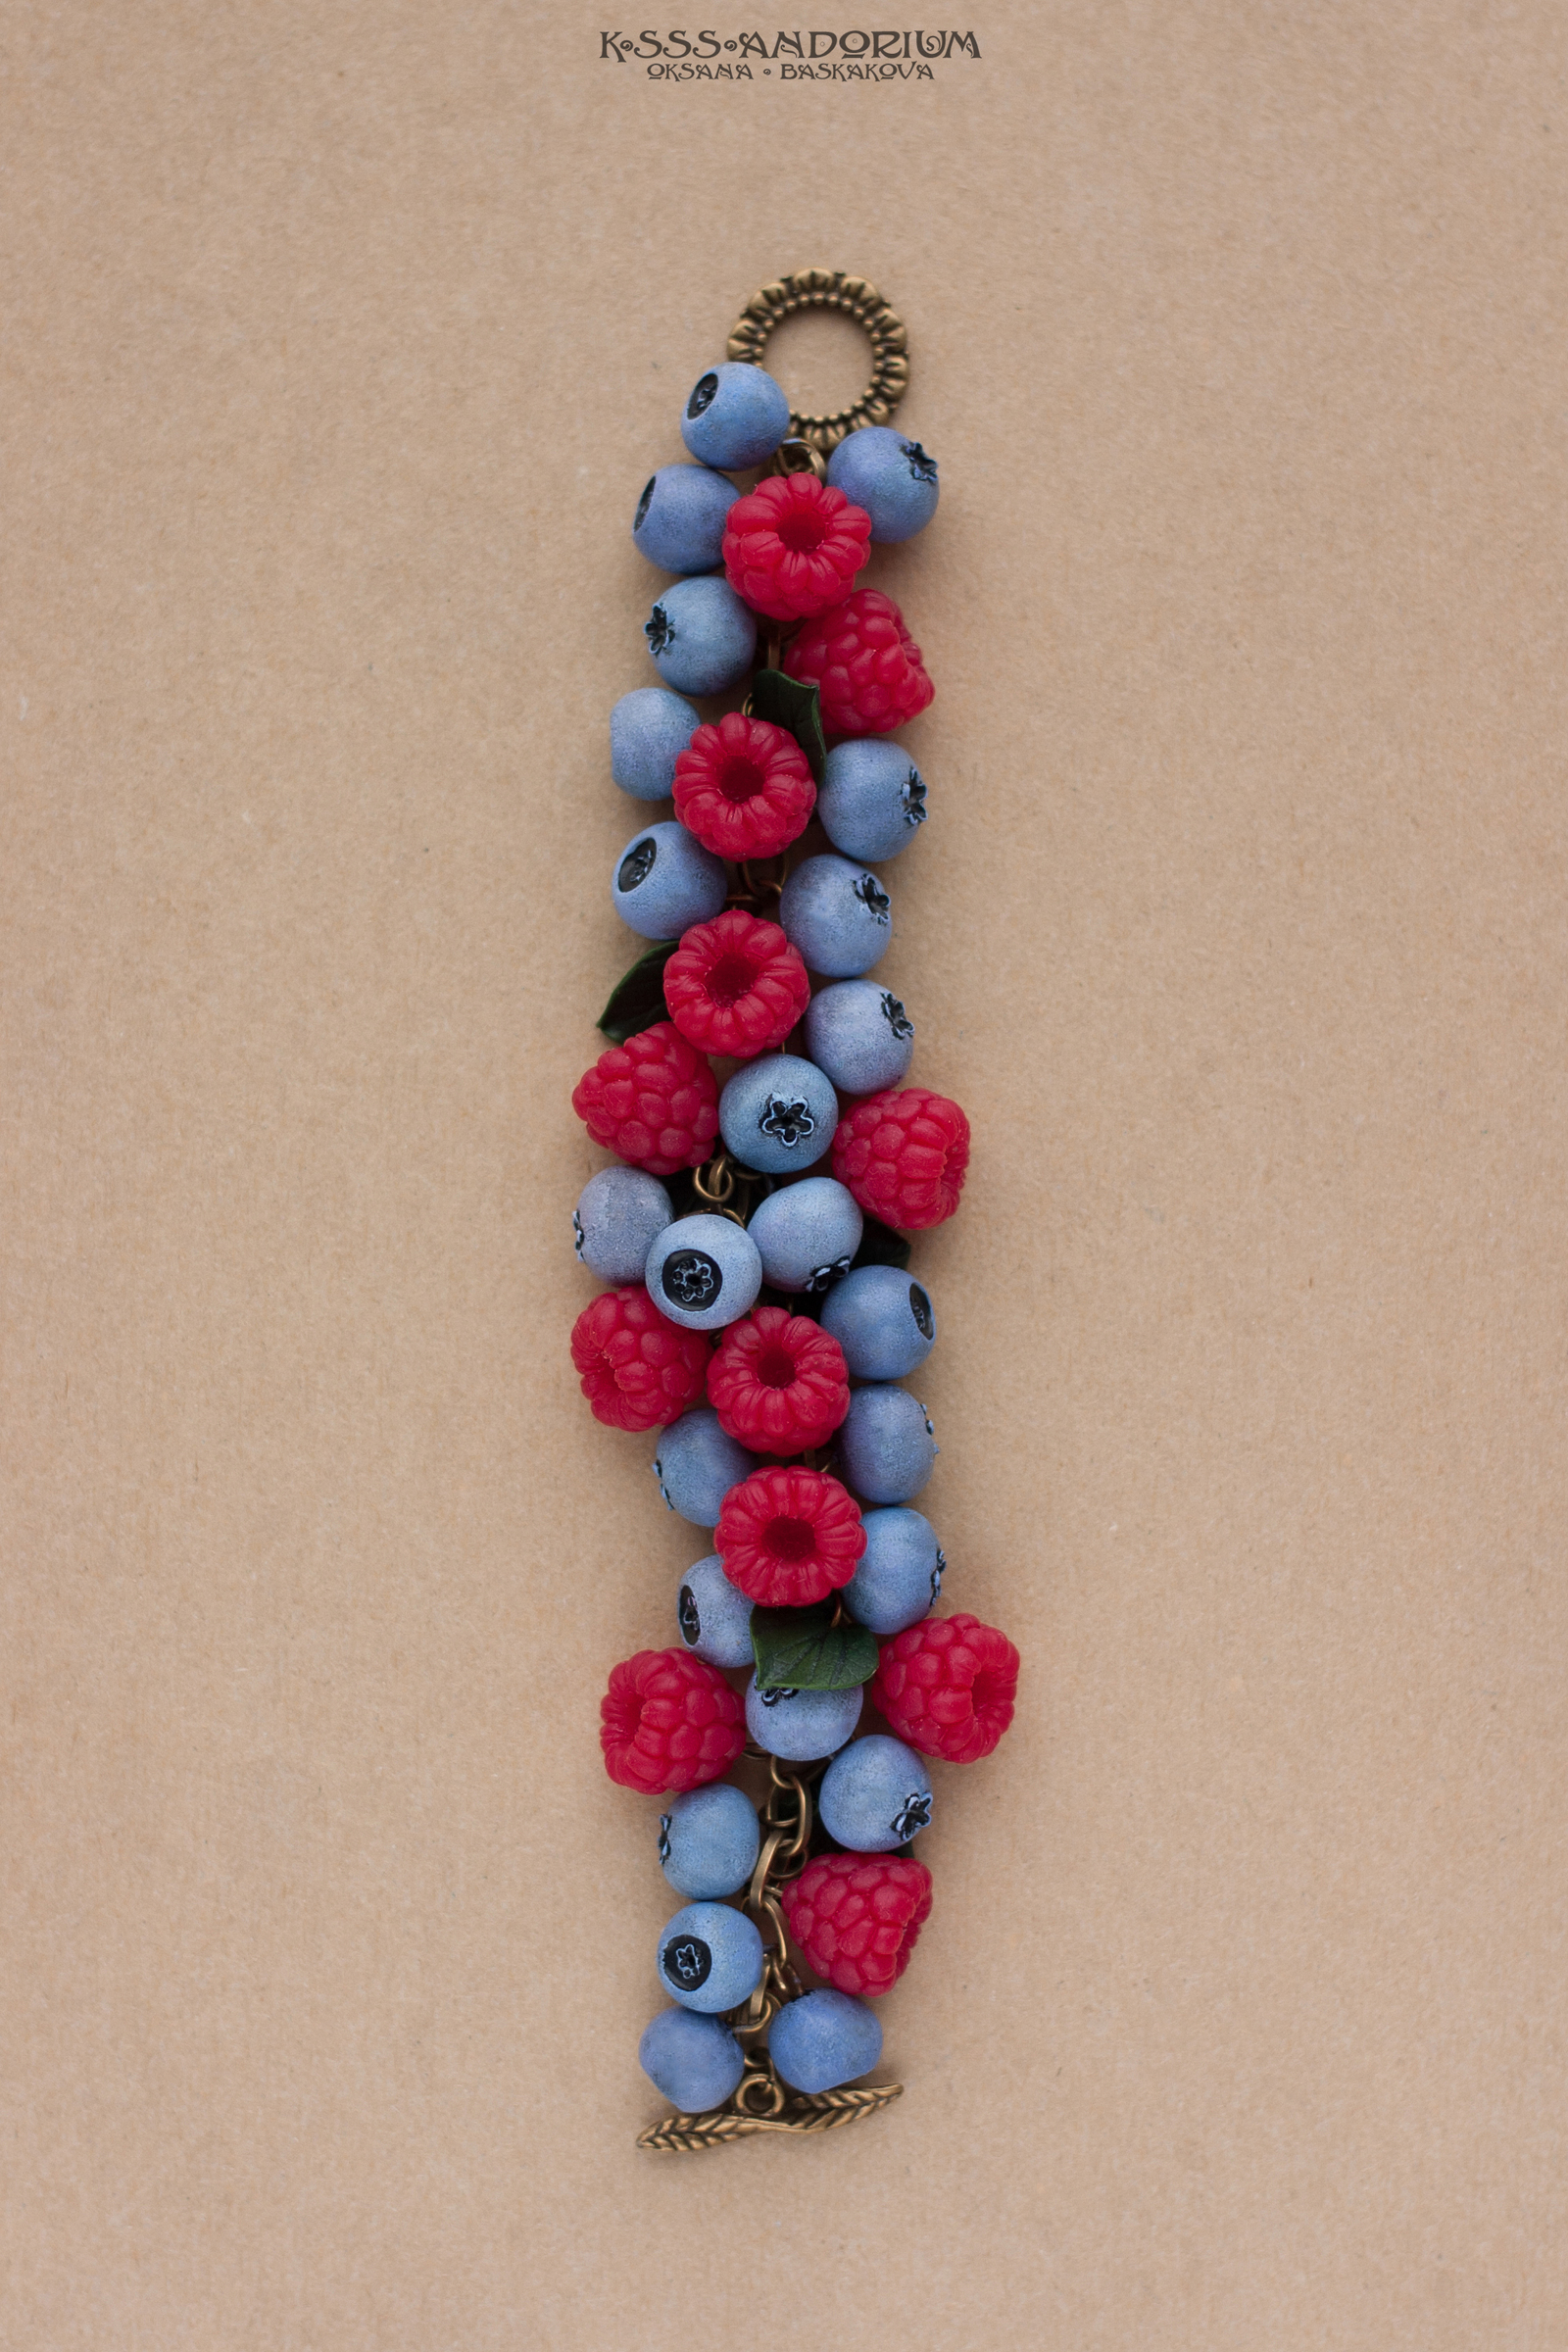 About berries and a variety of bracelets with them; - My, Ksssandorium, Raspberries, Blueberry, Snowberry, Handmade, Polymer clay, Decoration, A bracelet, Longpost